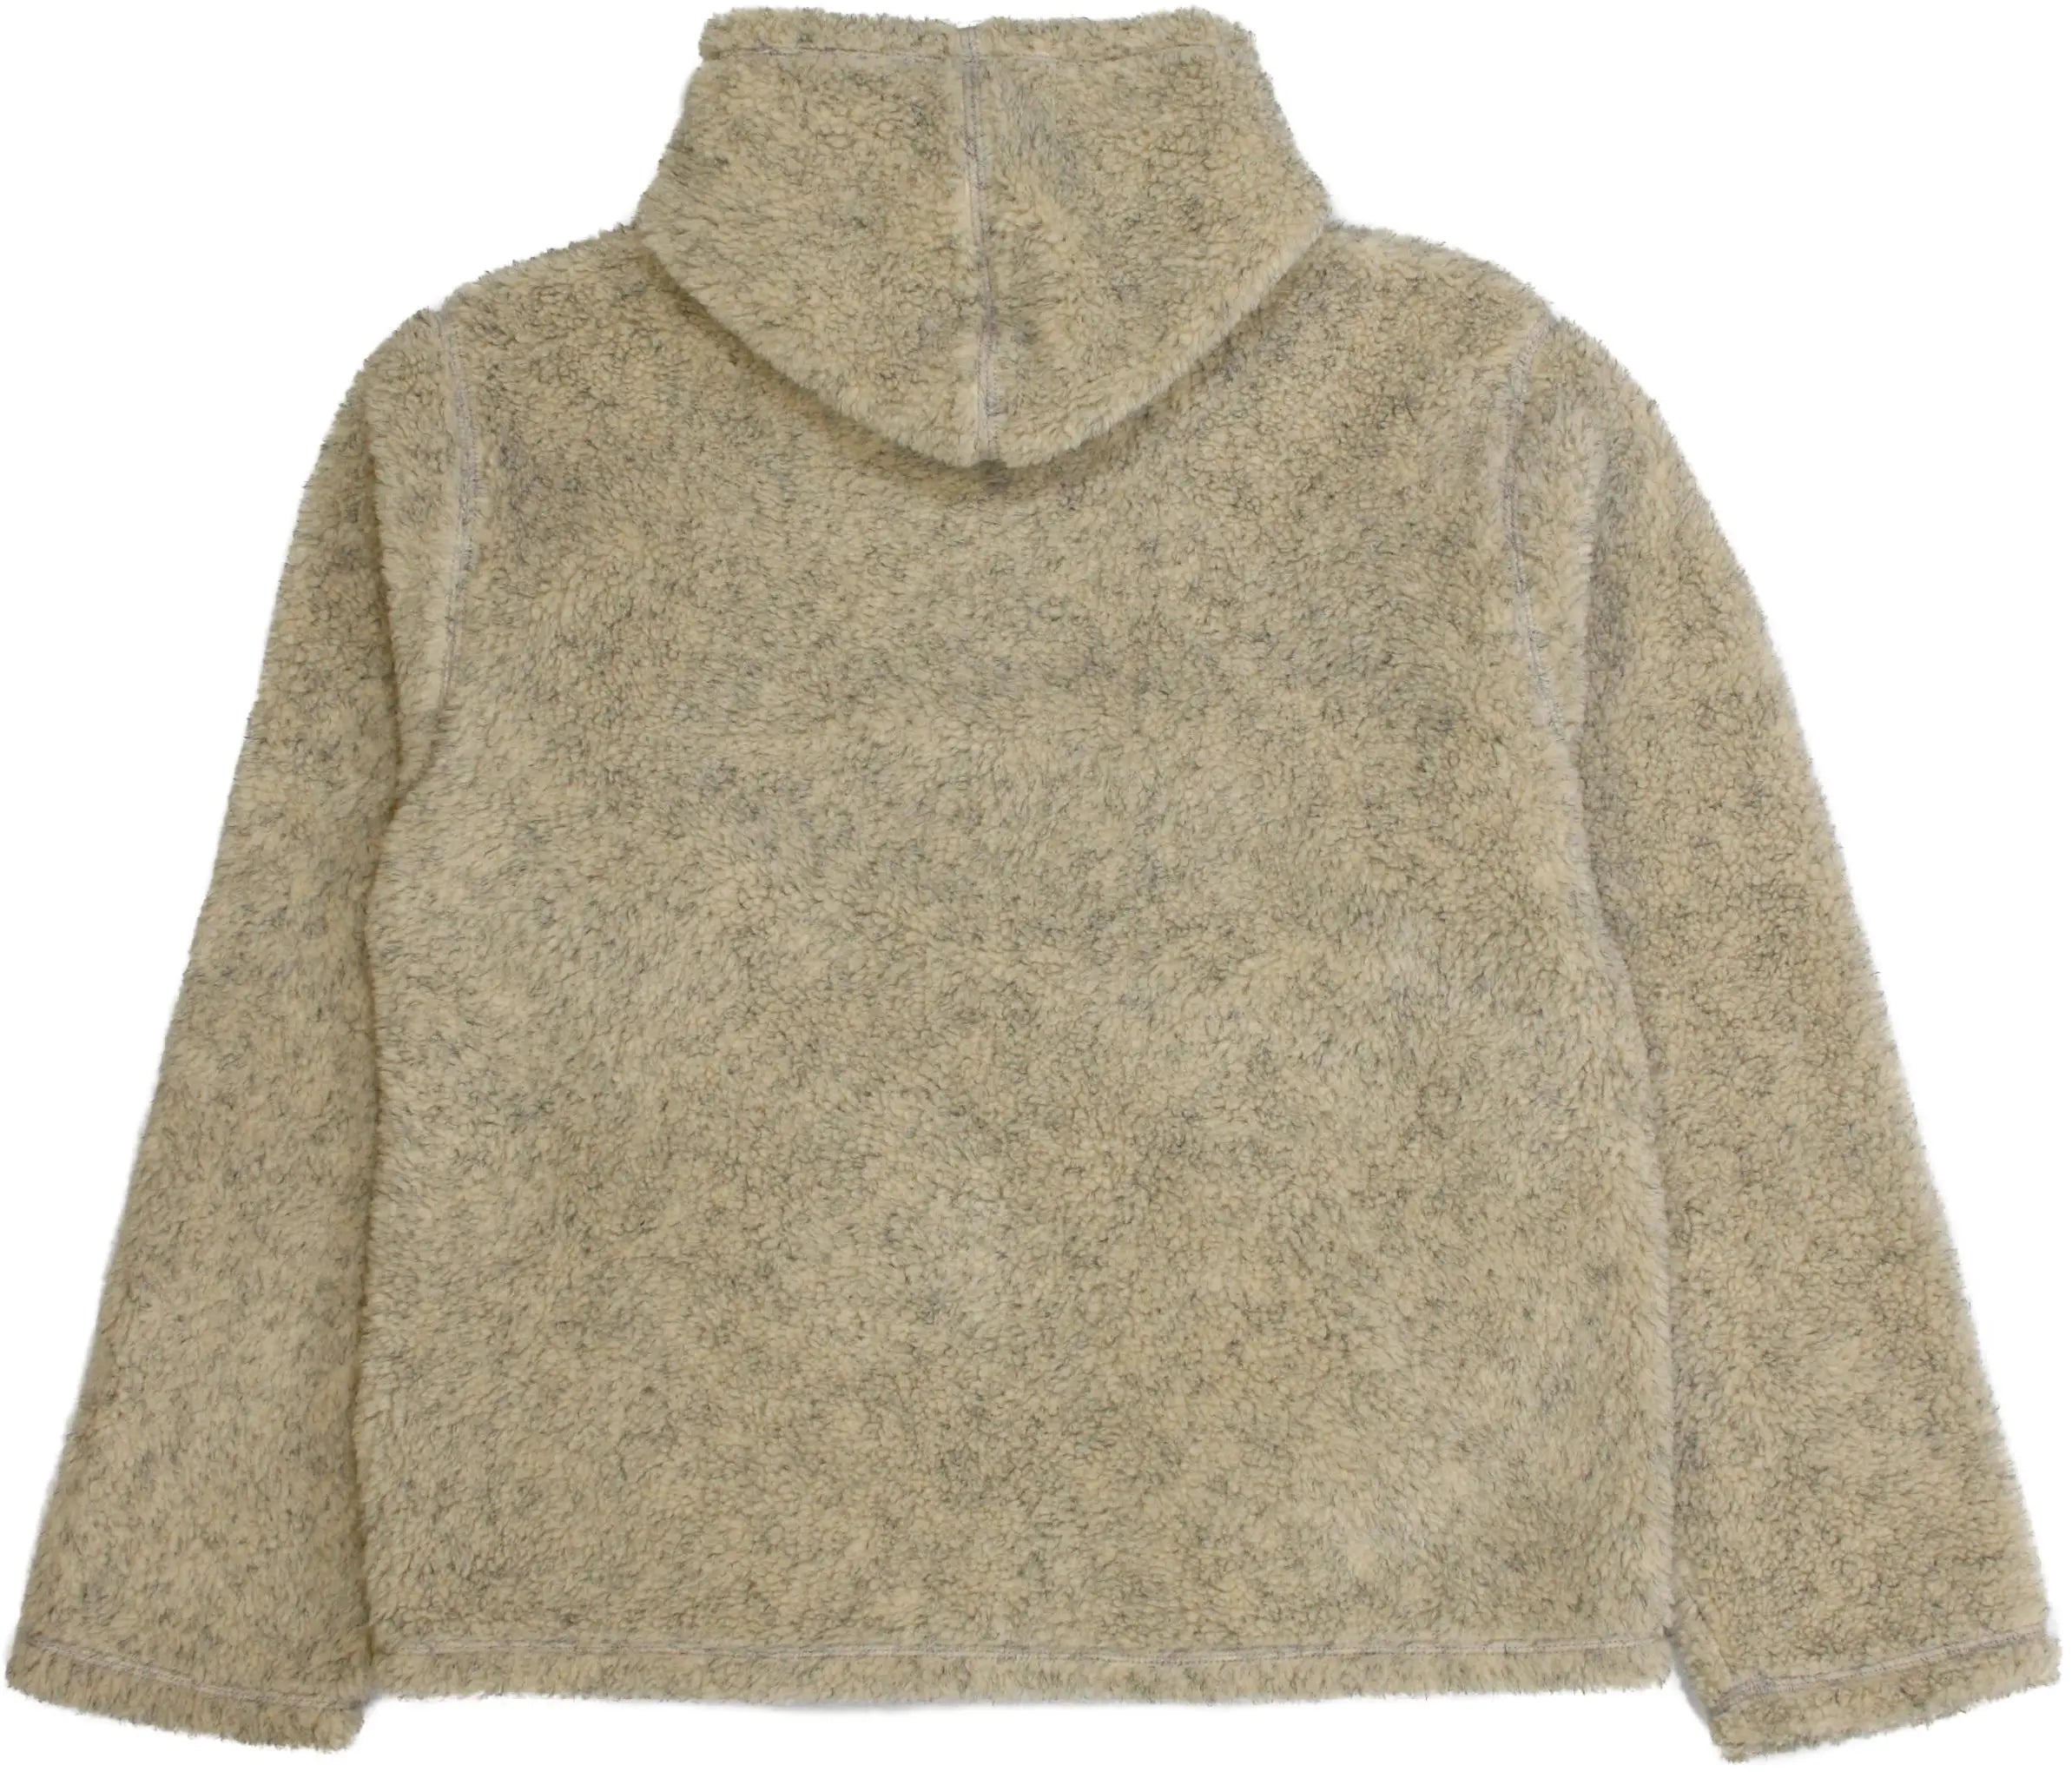 Trailer - Teddy Hooded Sweater- ThriftTale.com - Vintage and second handclothing